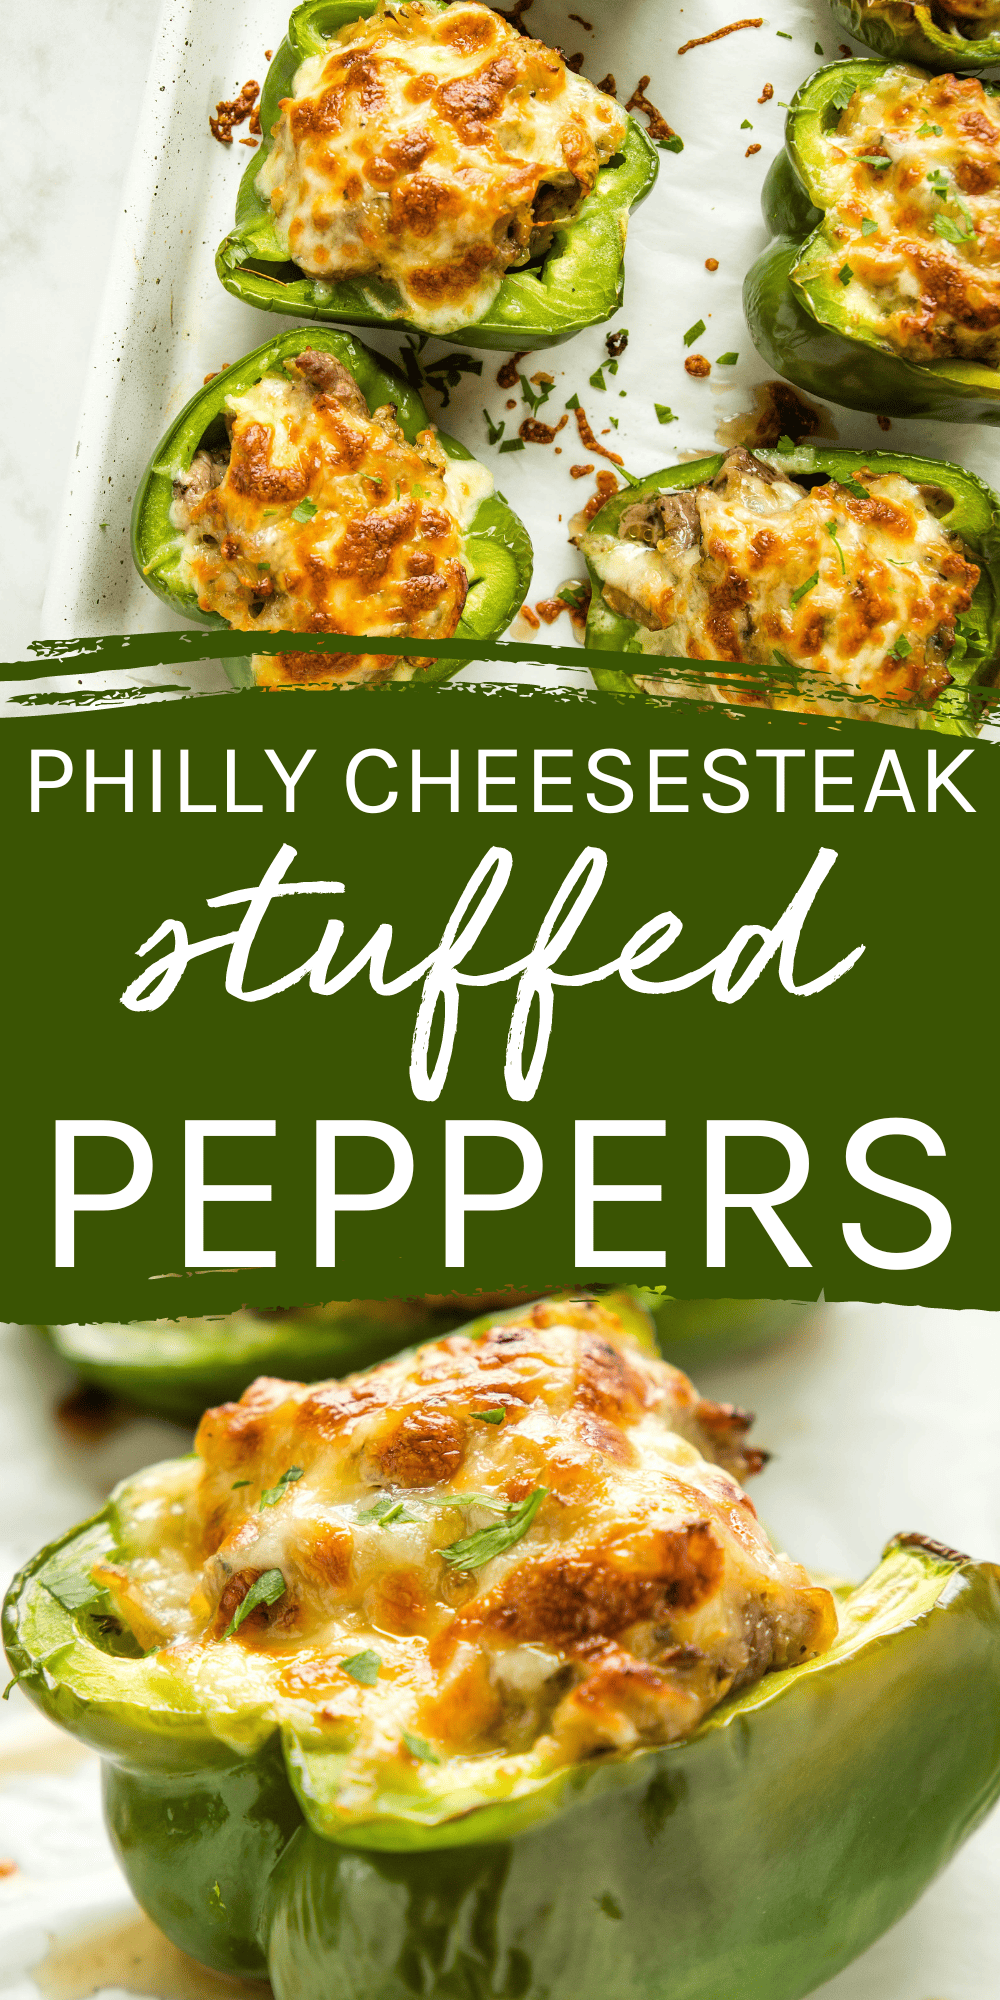 This Philly Cheesesteak Stuffed Peppers recipe is an easy healthy meal idea that's high in protein, low carb and keto-friendly with only 14 net carbs per serving. Made with steak, mushrooms, onions, and cheese, it's the perfect low carb way to enjoy the flavour of Philly Cheesesteak! Recipe from thebusybaker.ca! #phillycheesesteak #keto #steak #lowcarb #stuffedpeppers #lowcarbstuffedpeppers #easystuffedpeppers #lowcarbmeal #phillycheesesteakstuffedpeppers #stuffedpeppersrecipe #phillycheesesteakrecipe #ketomeal #ketodinner #ketorecipe via @busybakerblog